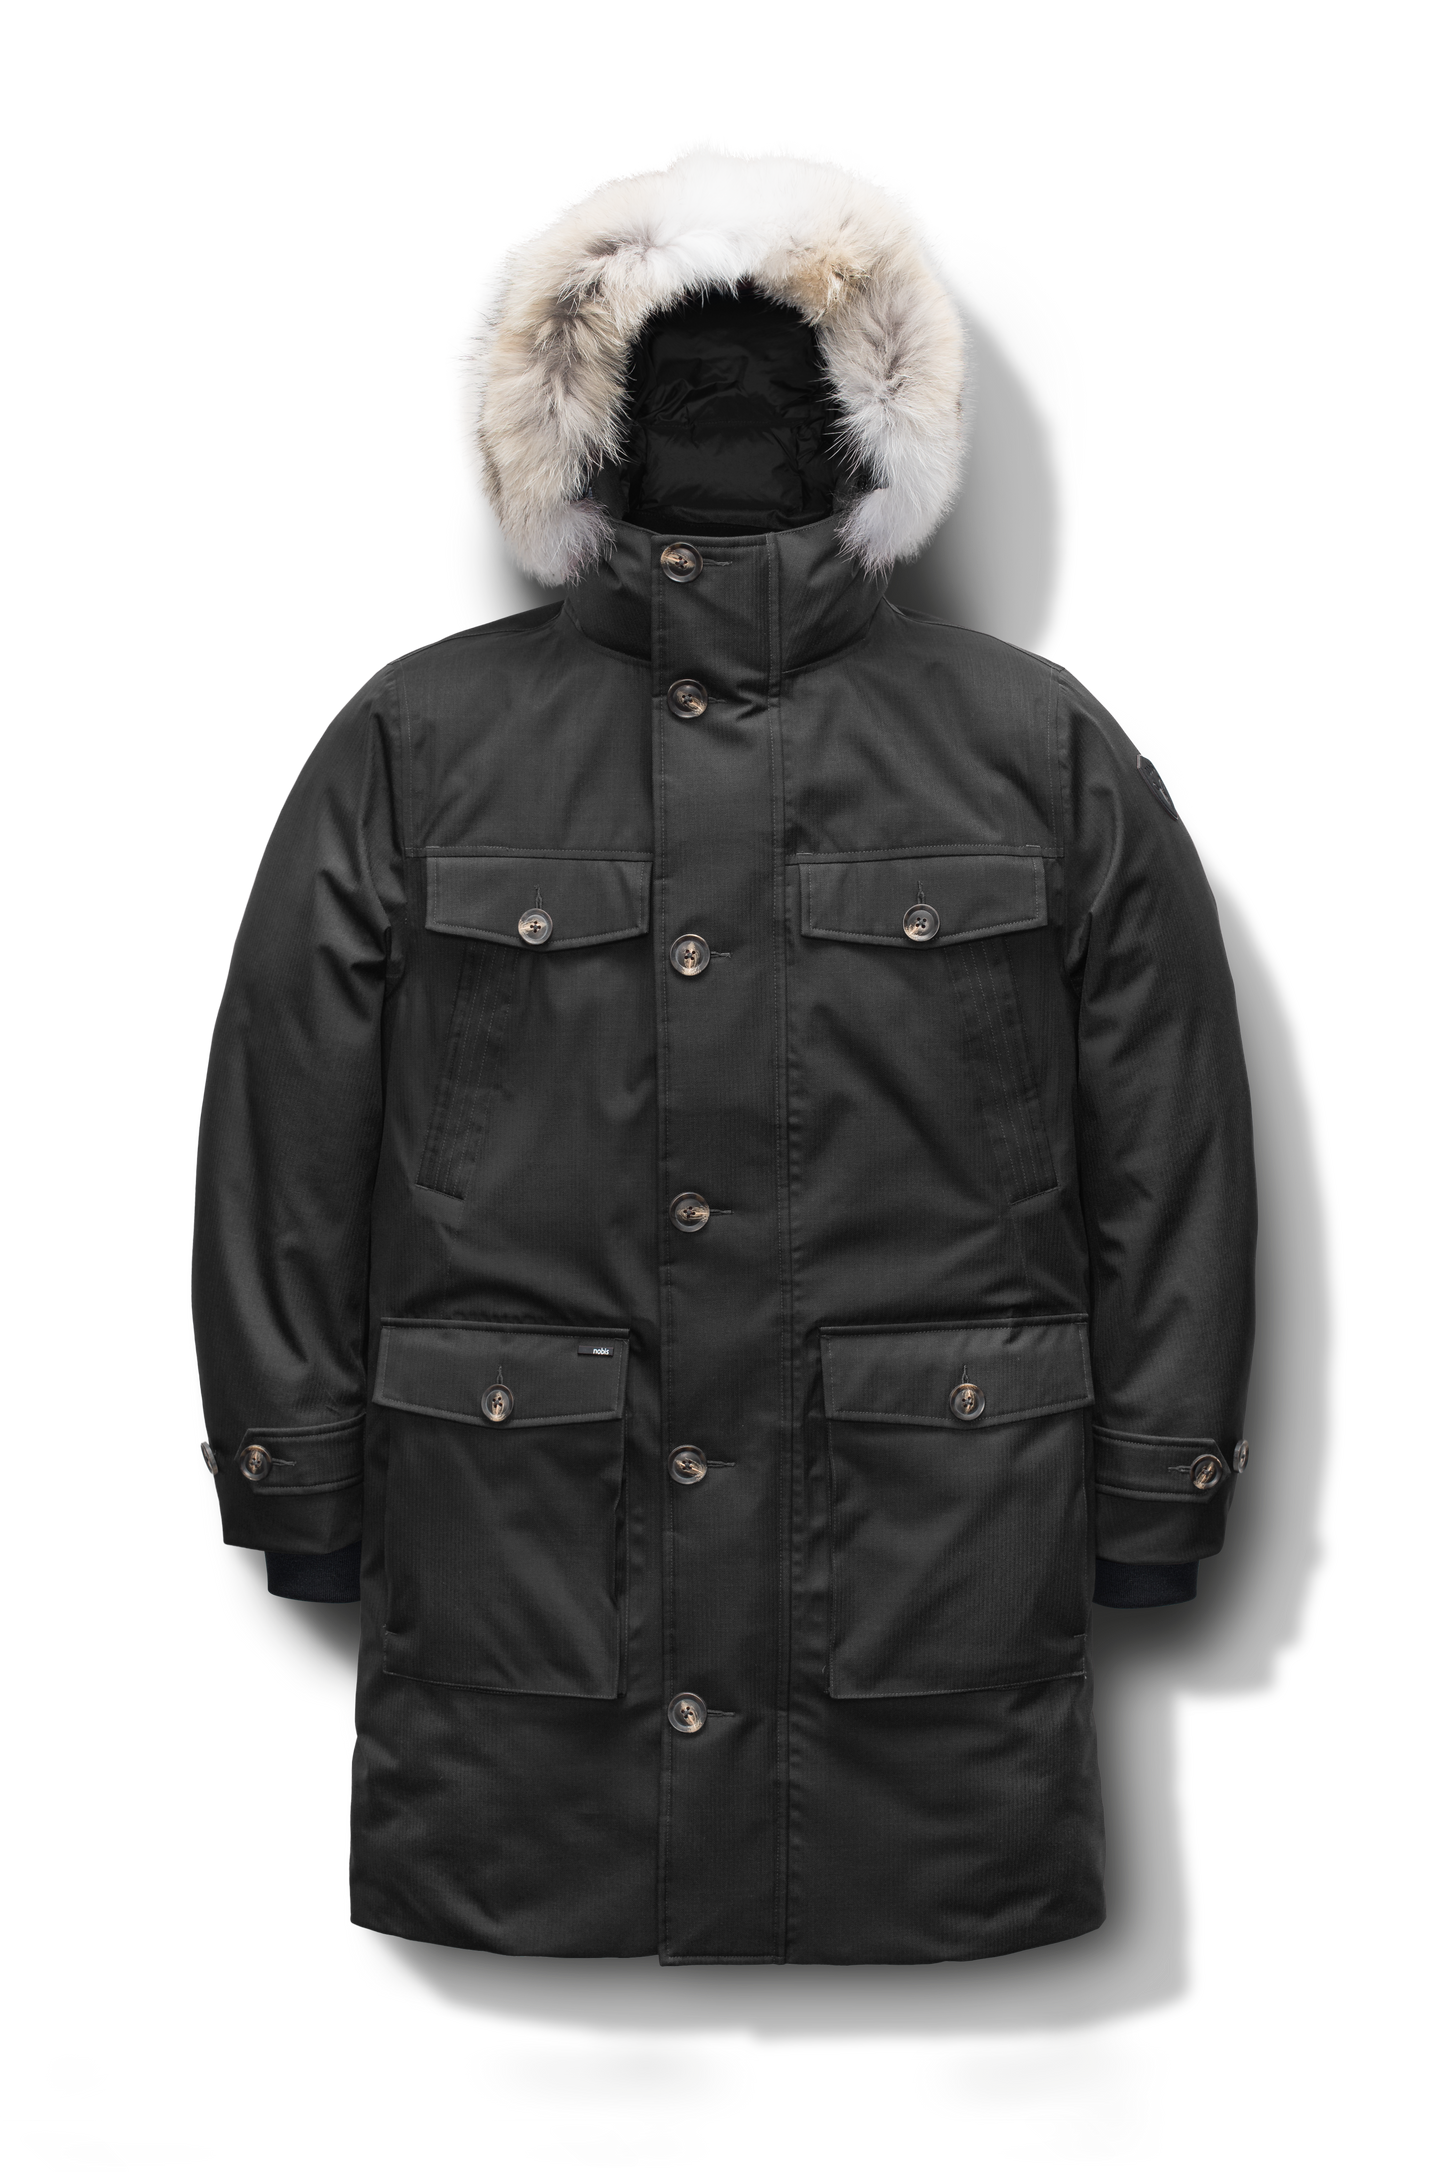 Citizen Men's Tailored Parka in knee length, Canadian duck down insulation, non-removable hood, and two-way zipper, in Black